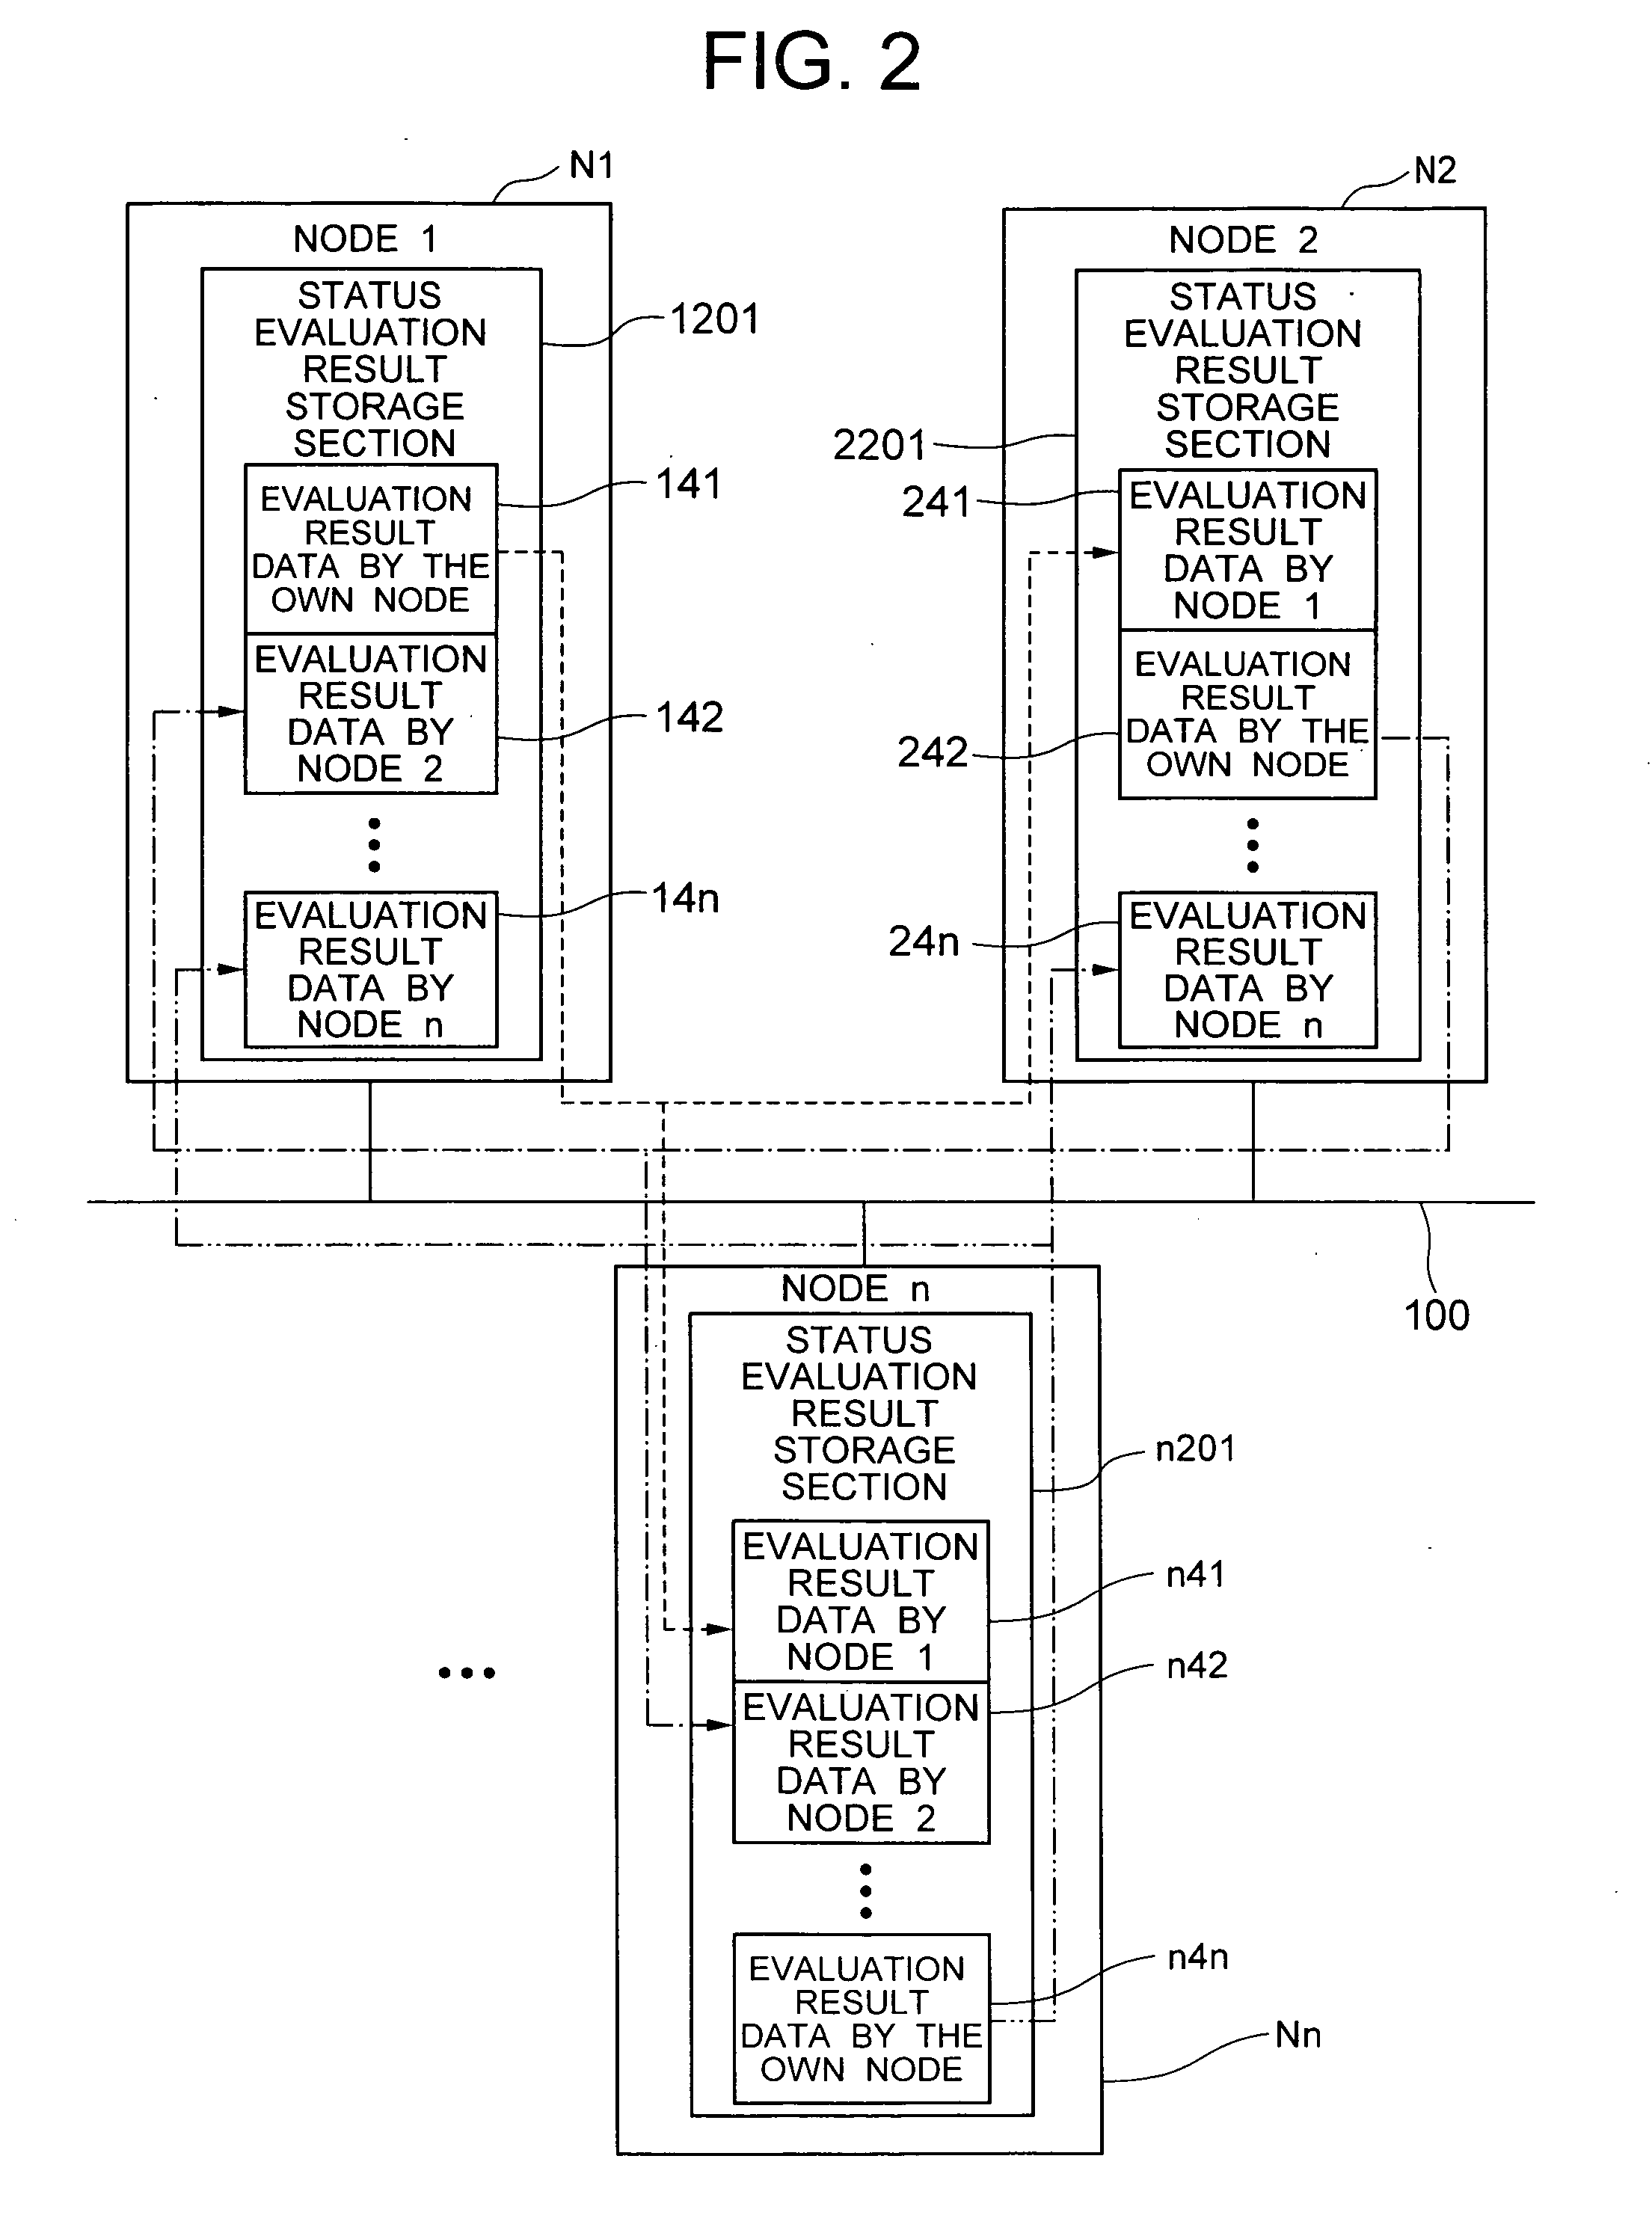 Vehicle control system